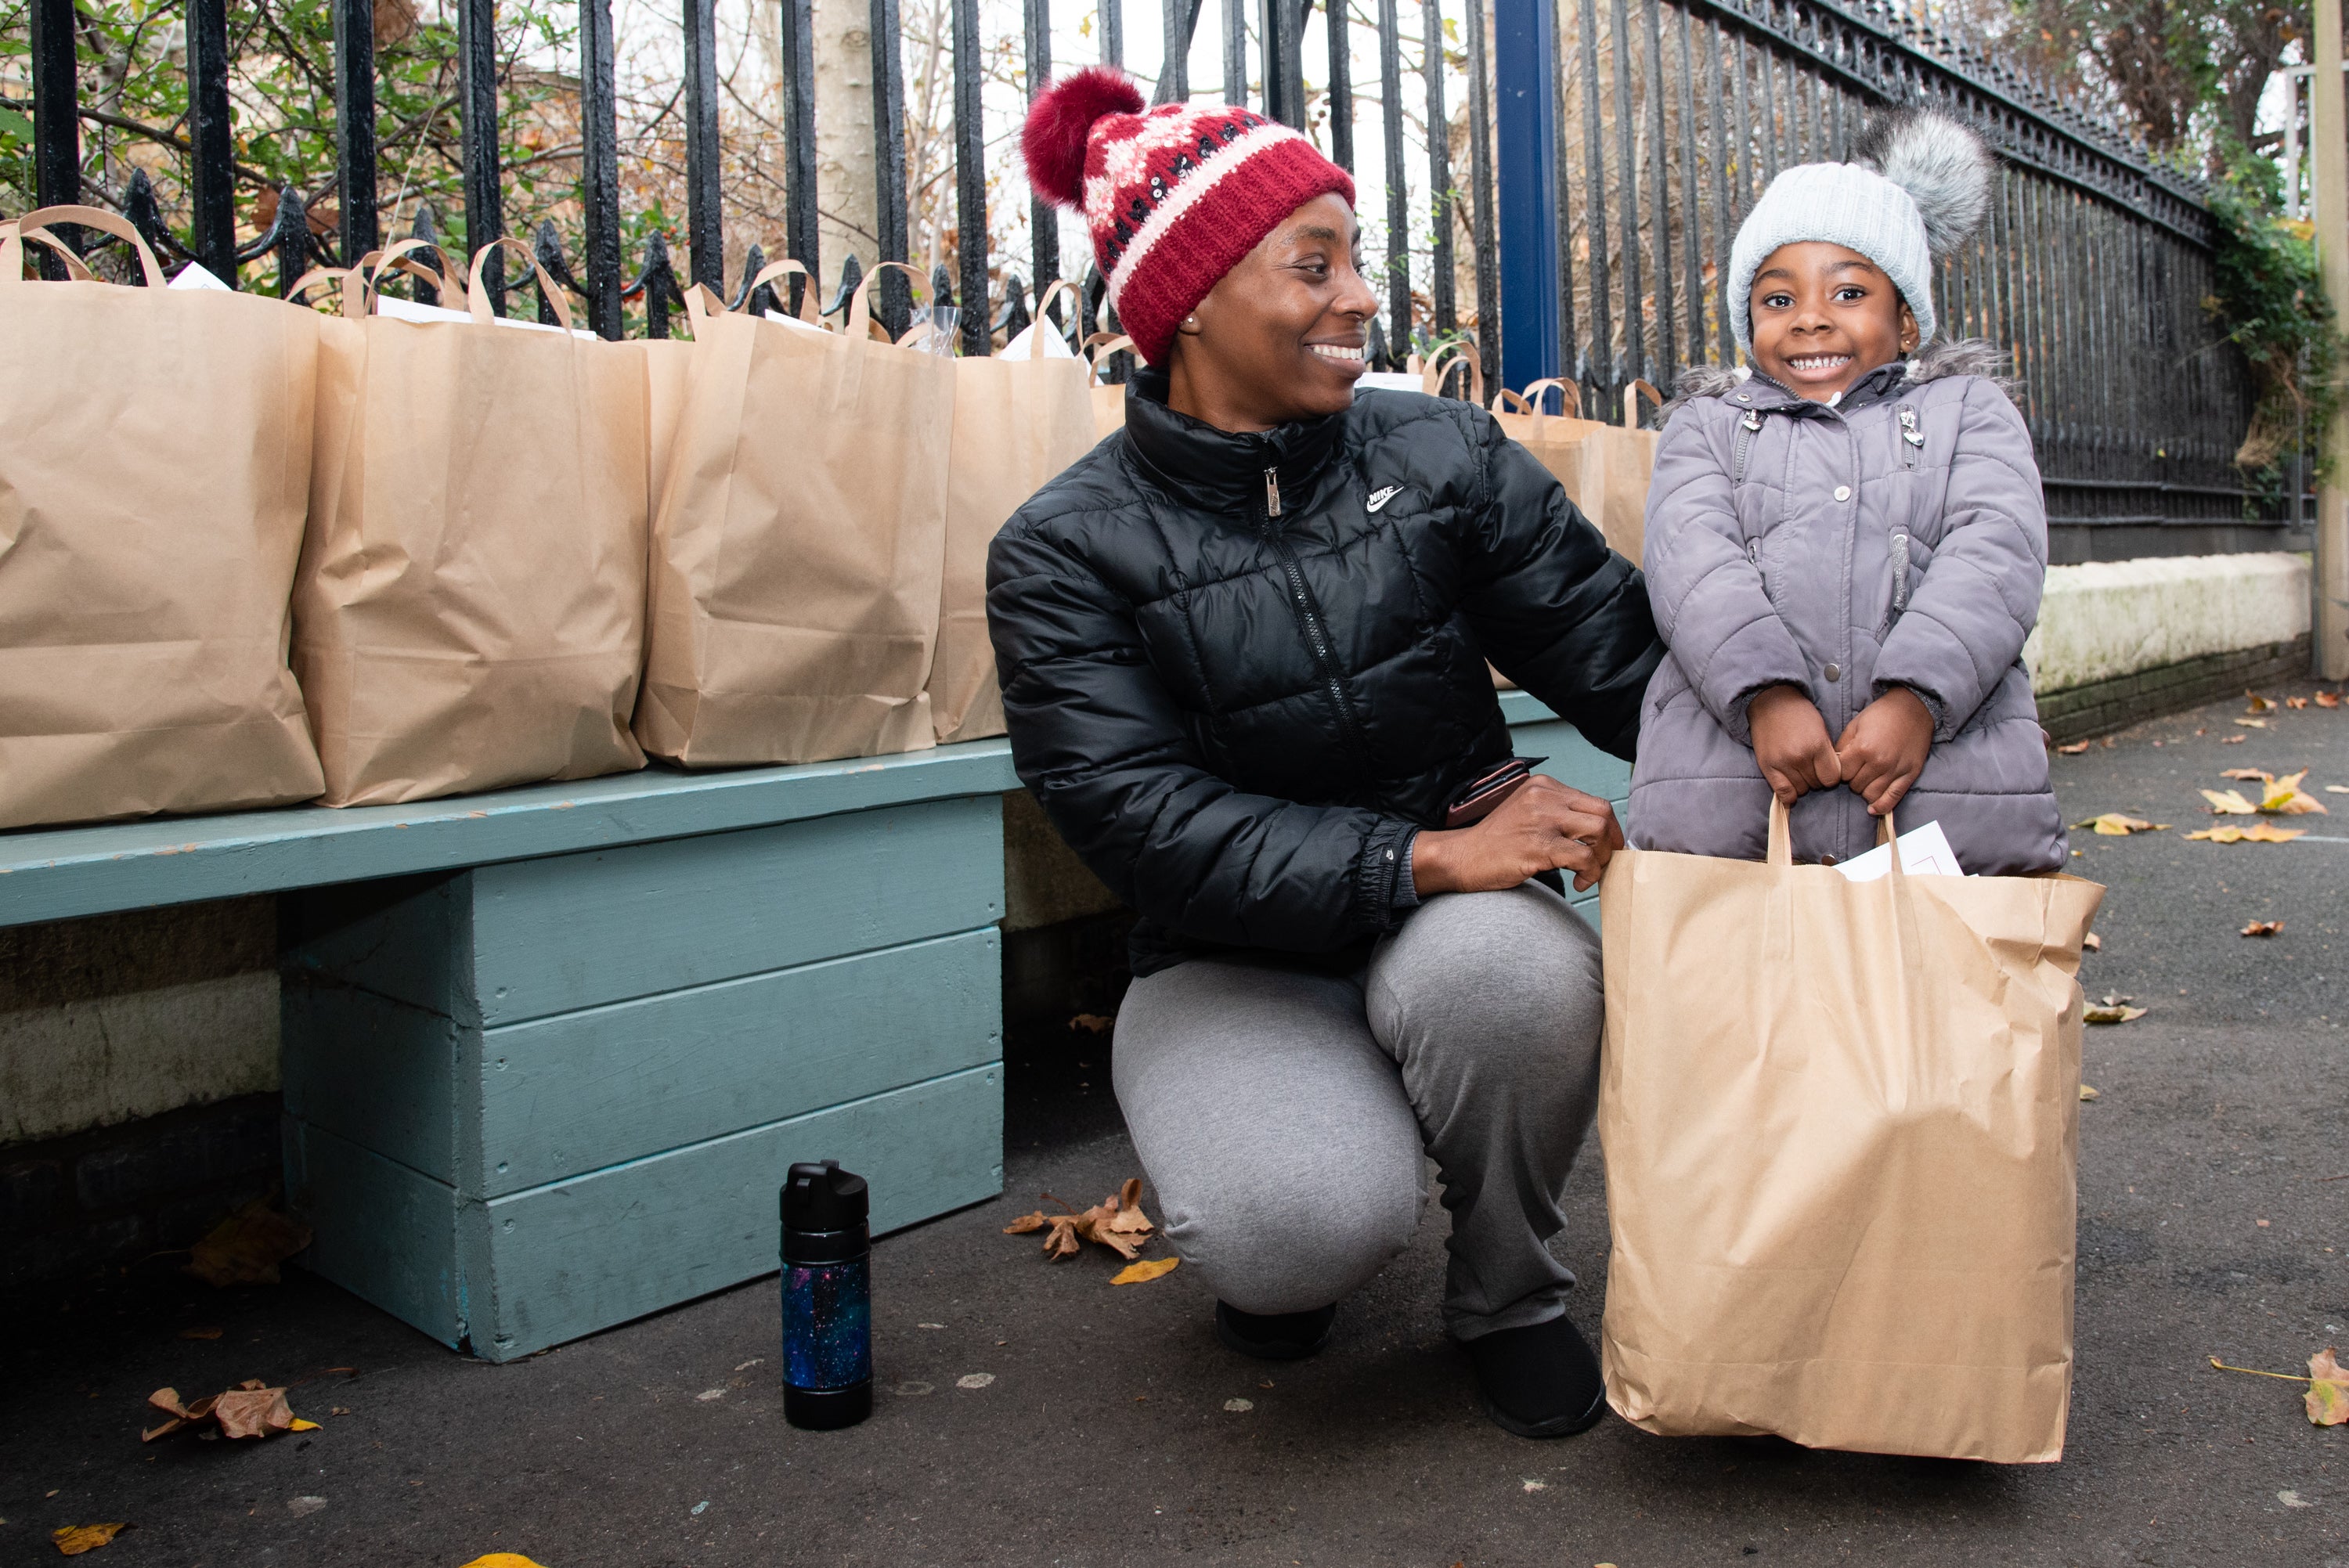 A family receives a breakfast box at a school in Southwark, thanks to the Unicef UK-funded project School Food Matters